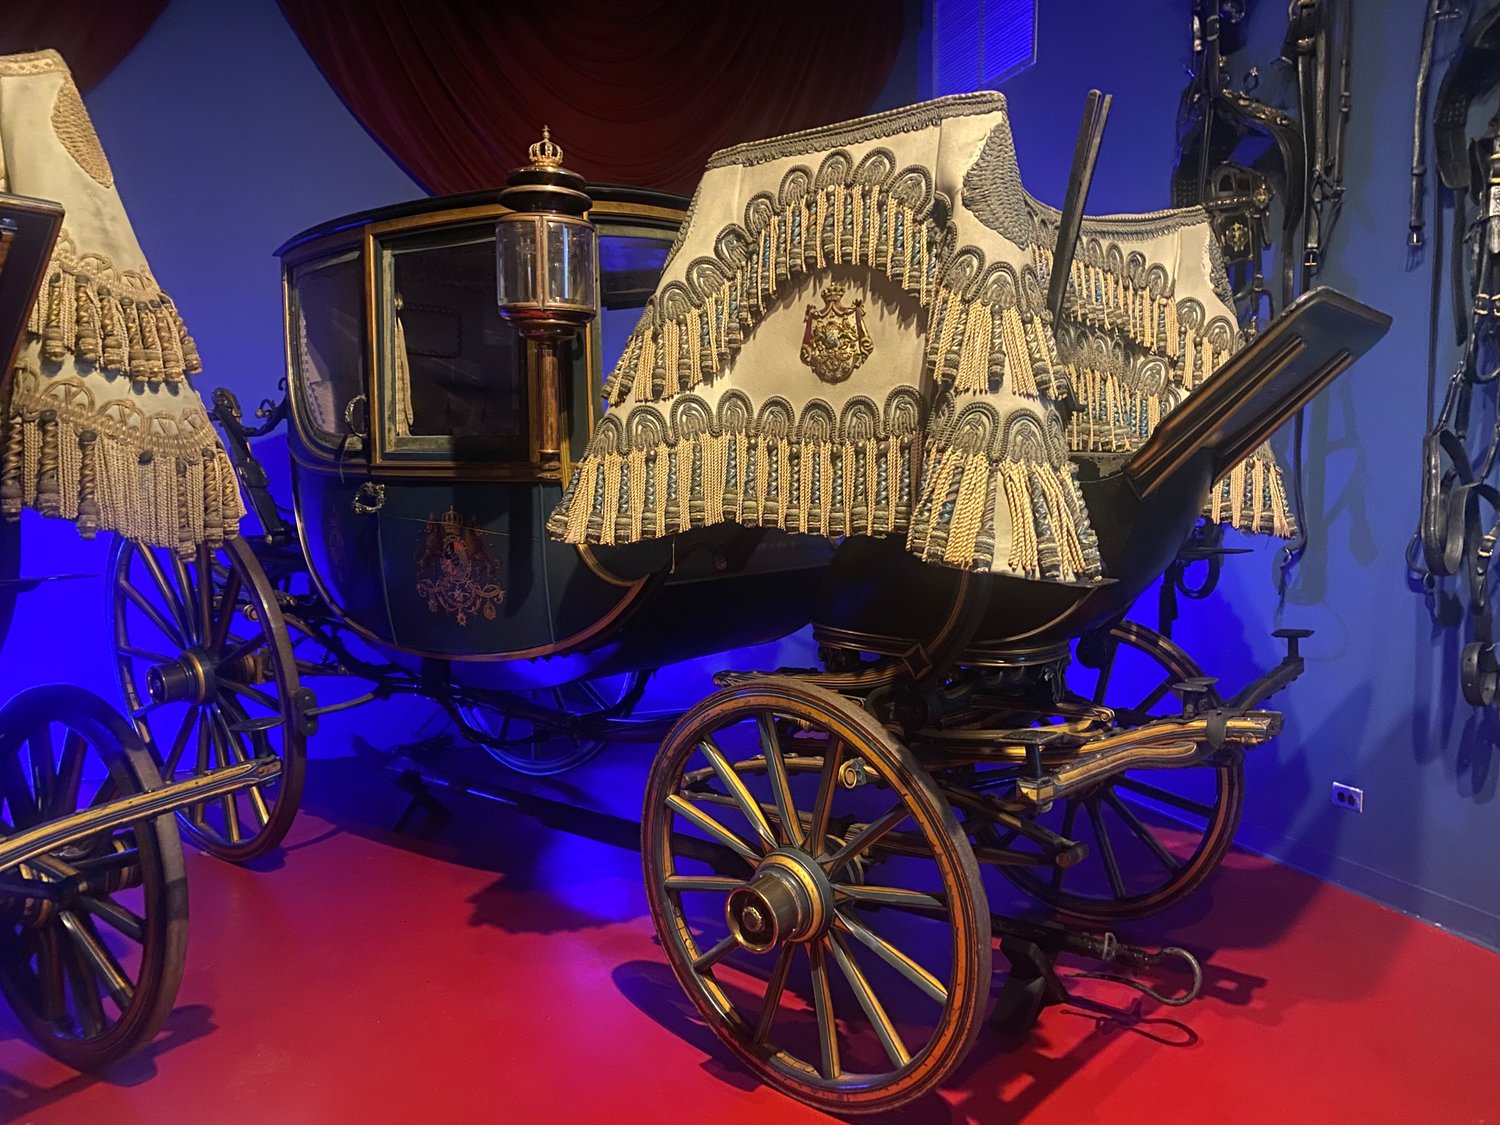 One of the gorgeous carriages used by European royalty at the Carriage Museum.